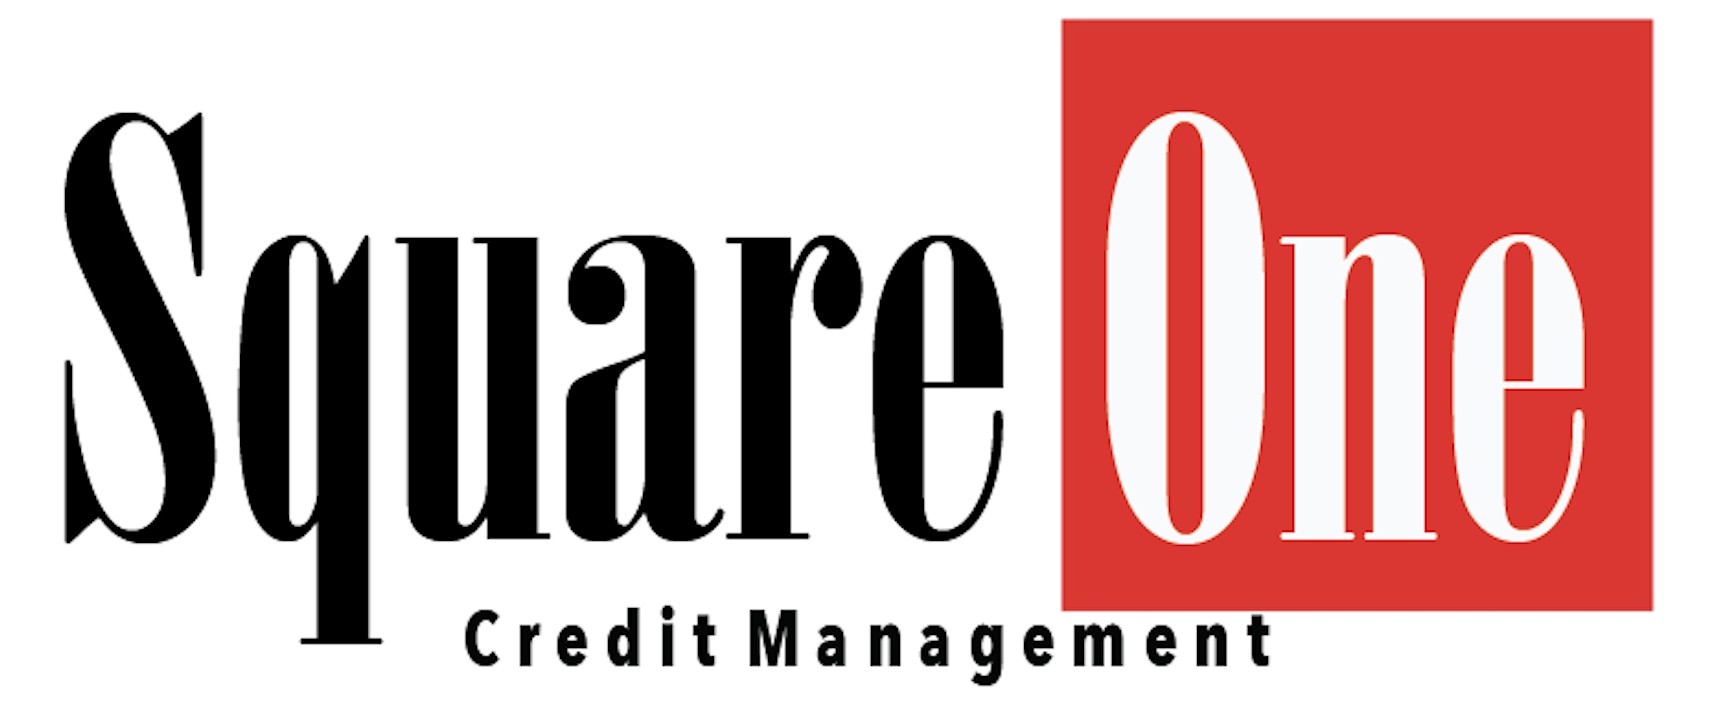 Square One Credit Management